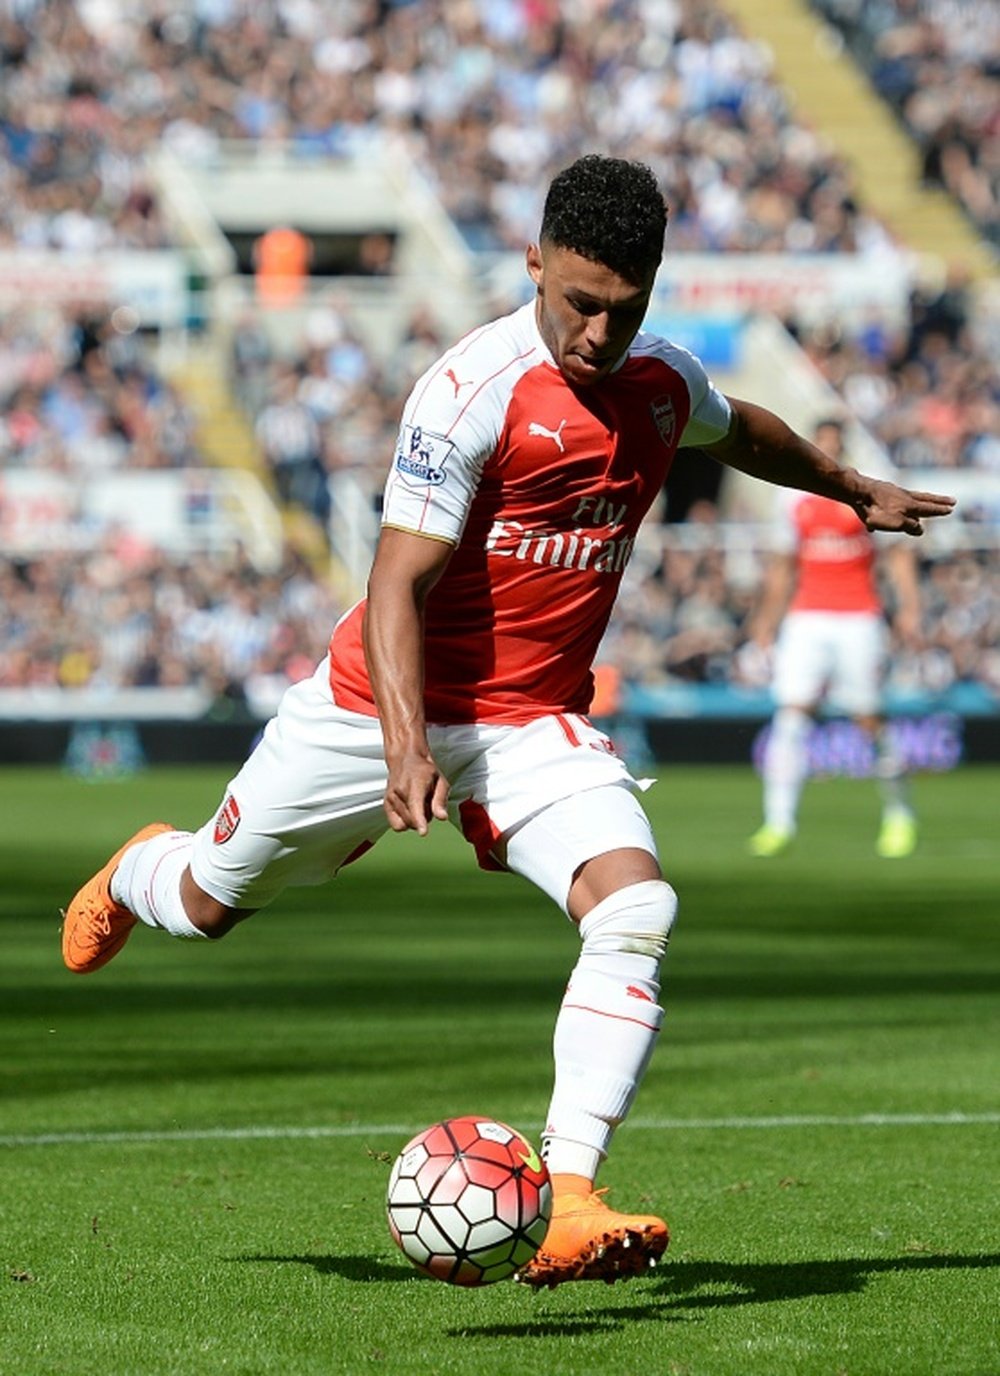 Arsenal's English midfielder Alex Oxlade-Chamberlain takes a shot which deflected in for Arsenal's opening goal in the English Premier League football match between Newcastle United and Arsenal in Newcastle-upon-Tyne, England, on August 29, 2015